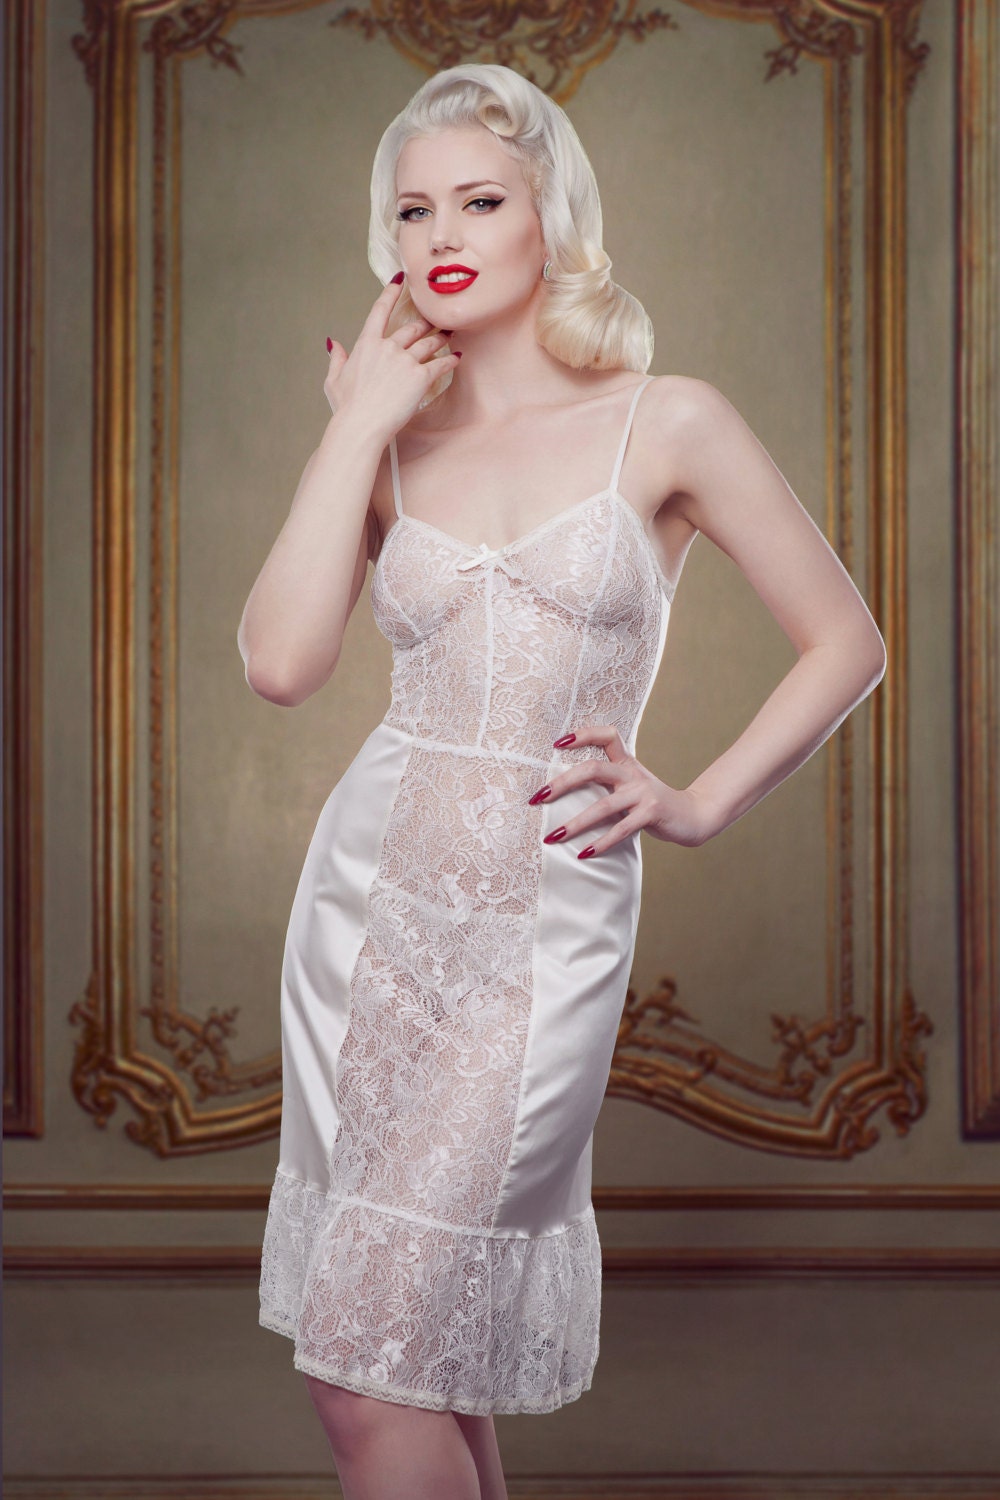 Wedding Dress Slip, Ivory Lace and Silk Satin Lingerie Slip Petticoat,  Inspired by Marilyn Monroe, Pin-up Girl, Retro, Vintage Style. 